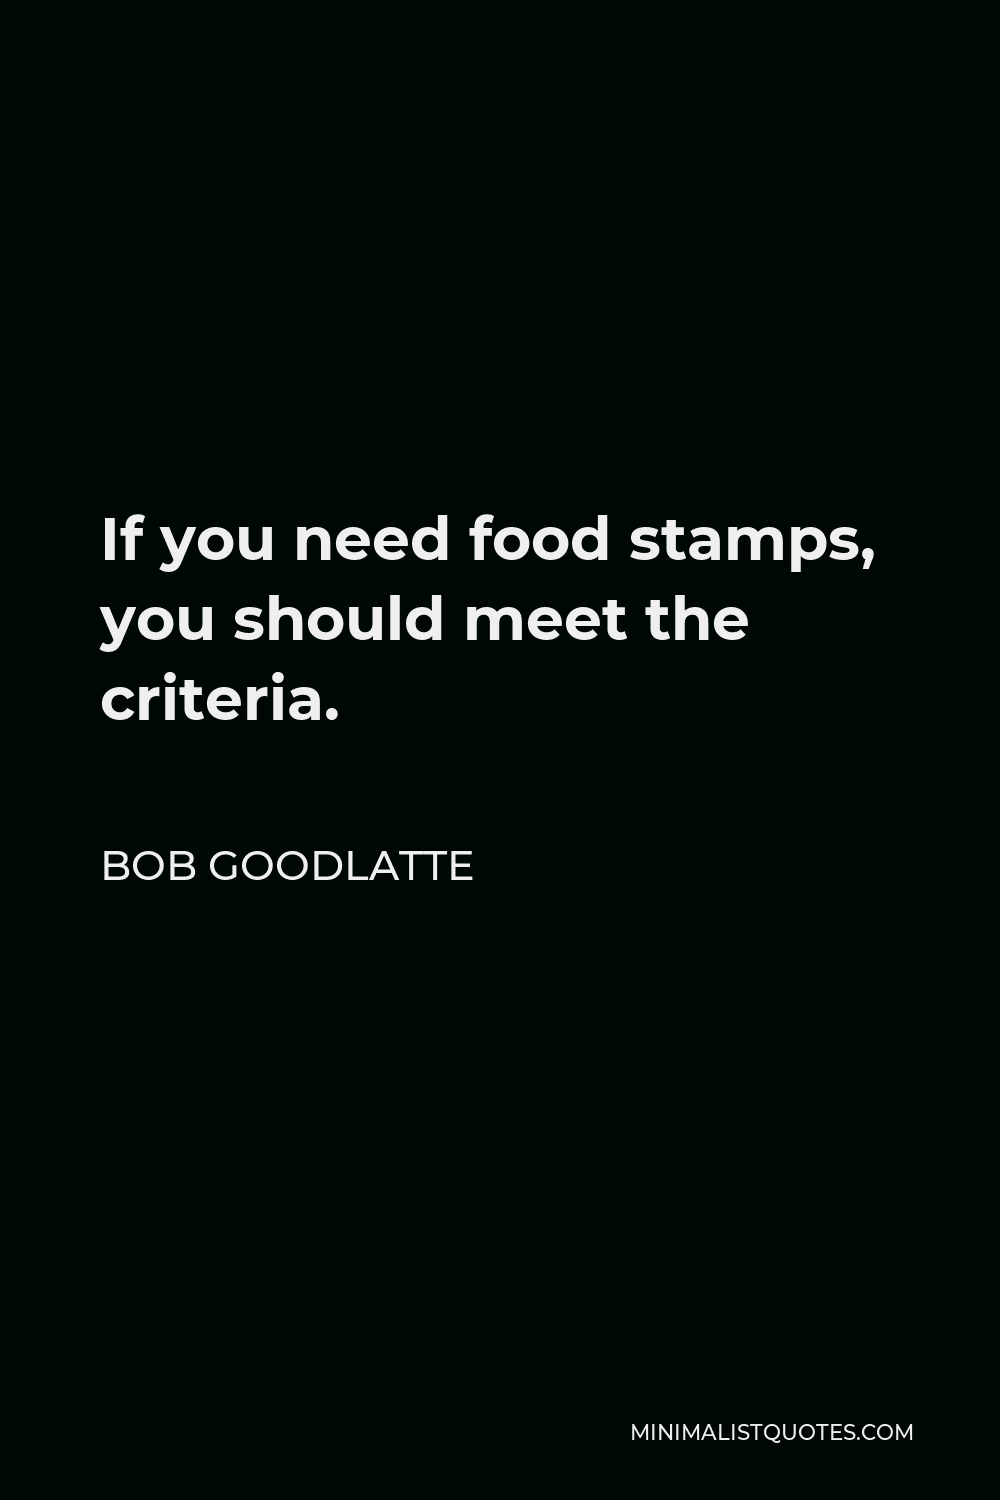 Bob Goodlatte Quote - If you need food stamps, you should meet the criteria.